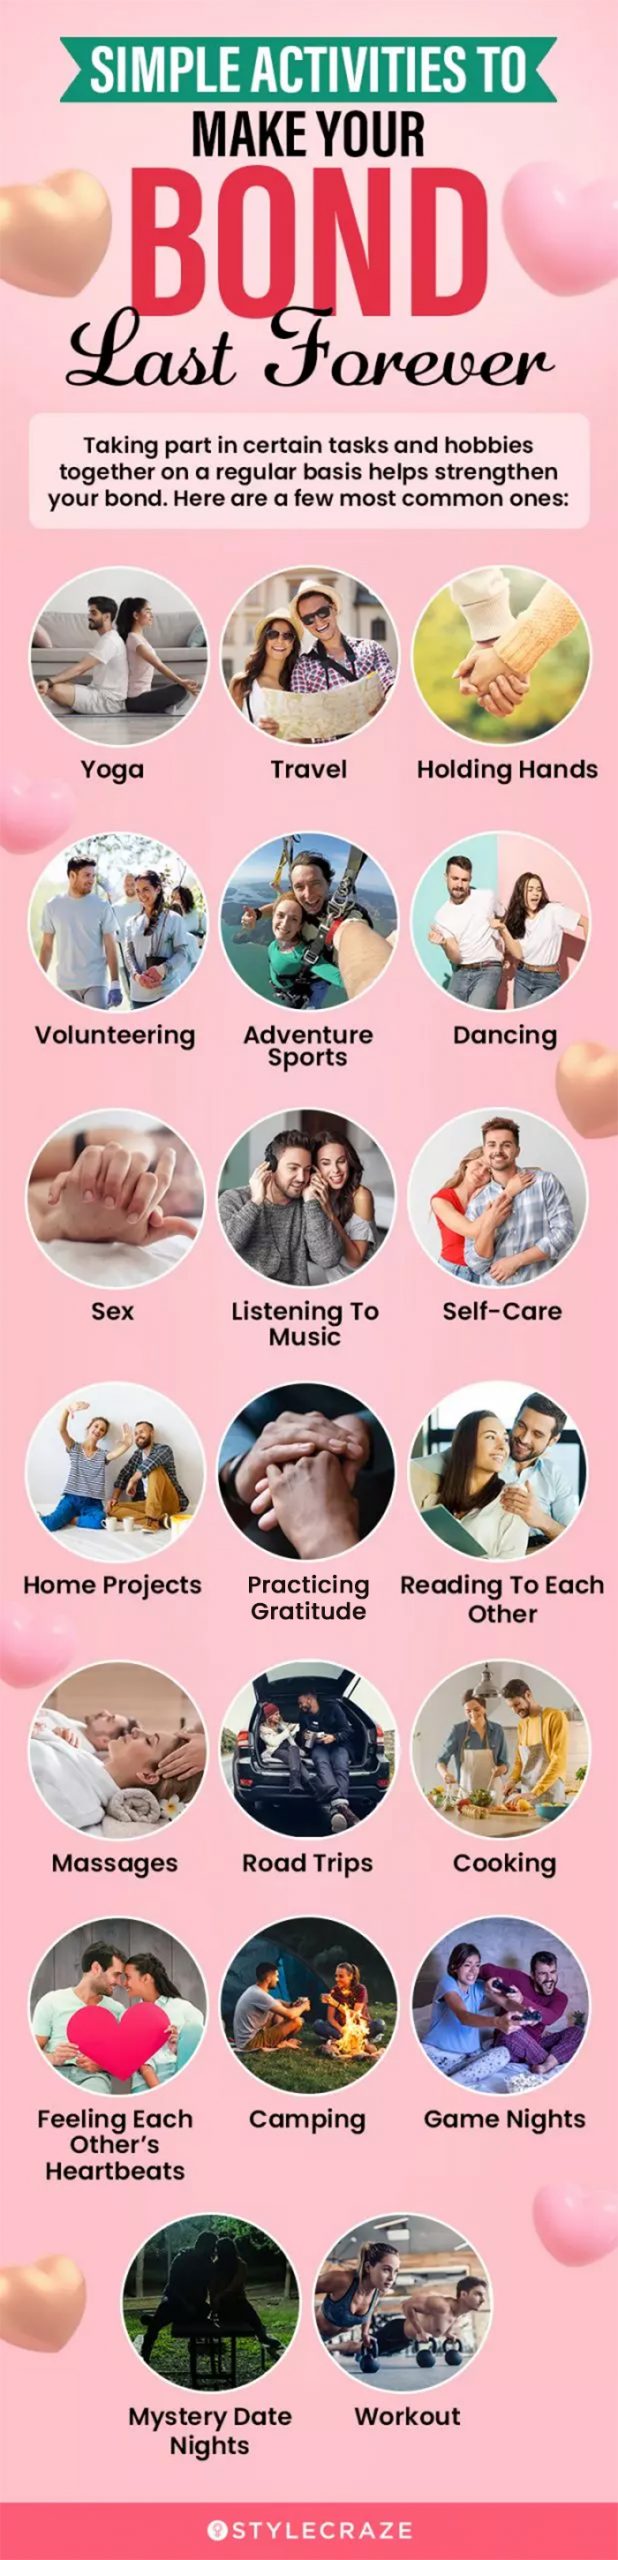 simple activities to make your bond last forever (infographic)